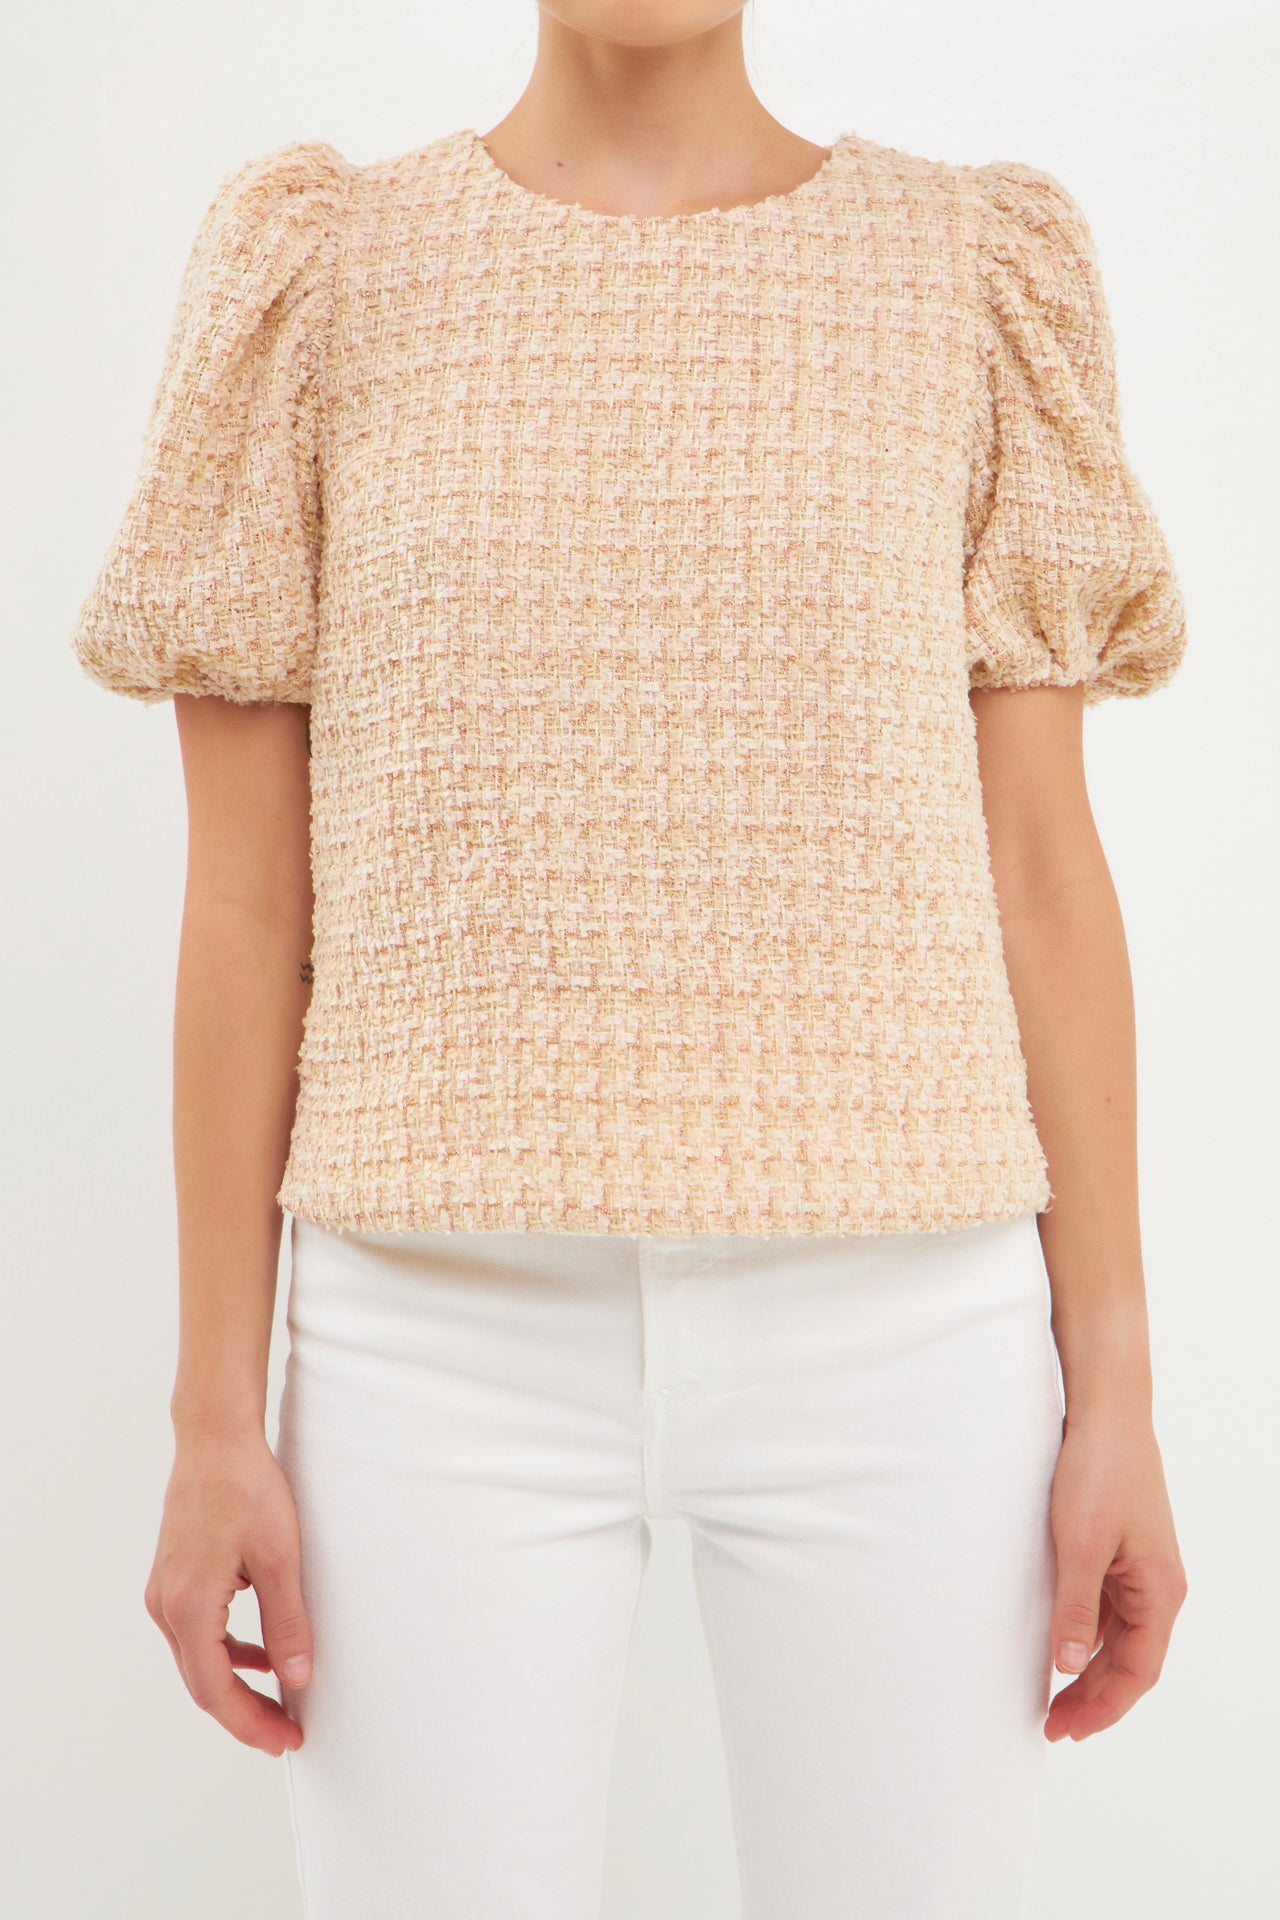 ENGLISH FACTORY - Multi Tweed Top - TOPS available at Objectrare